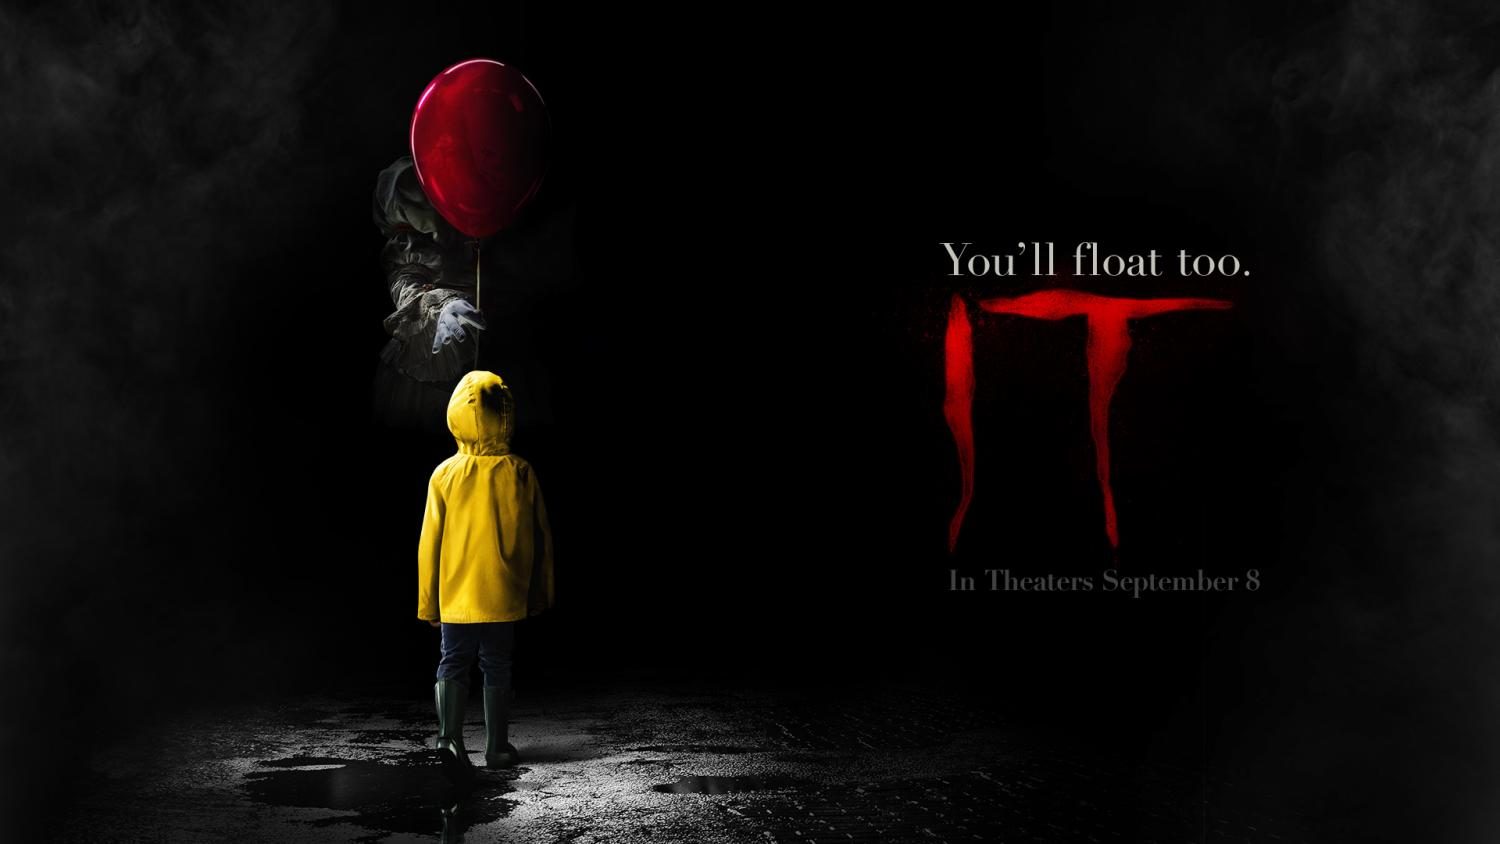 It+satisfies+but+has+the+audience+wanting+more